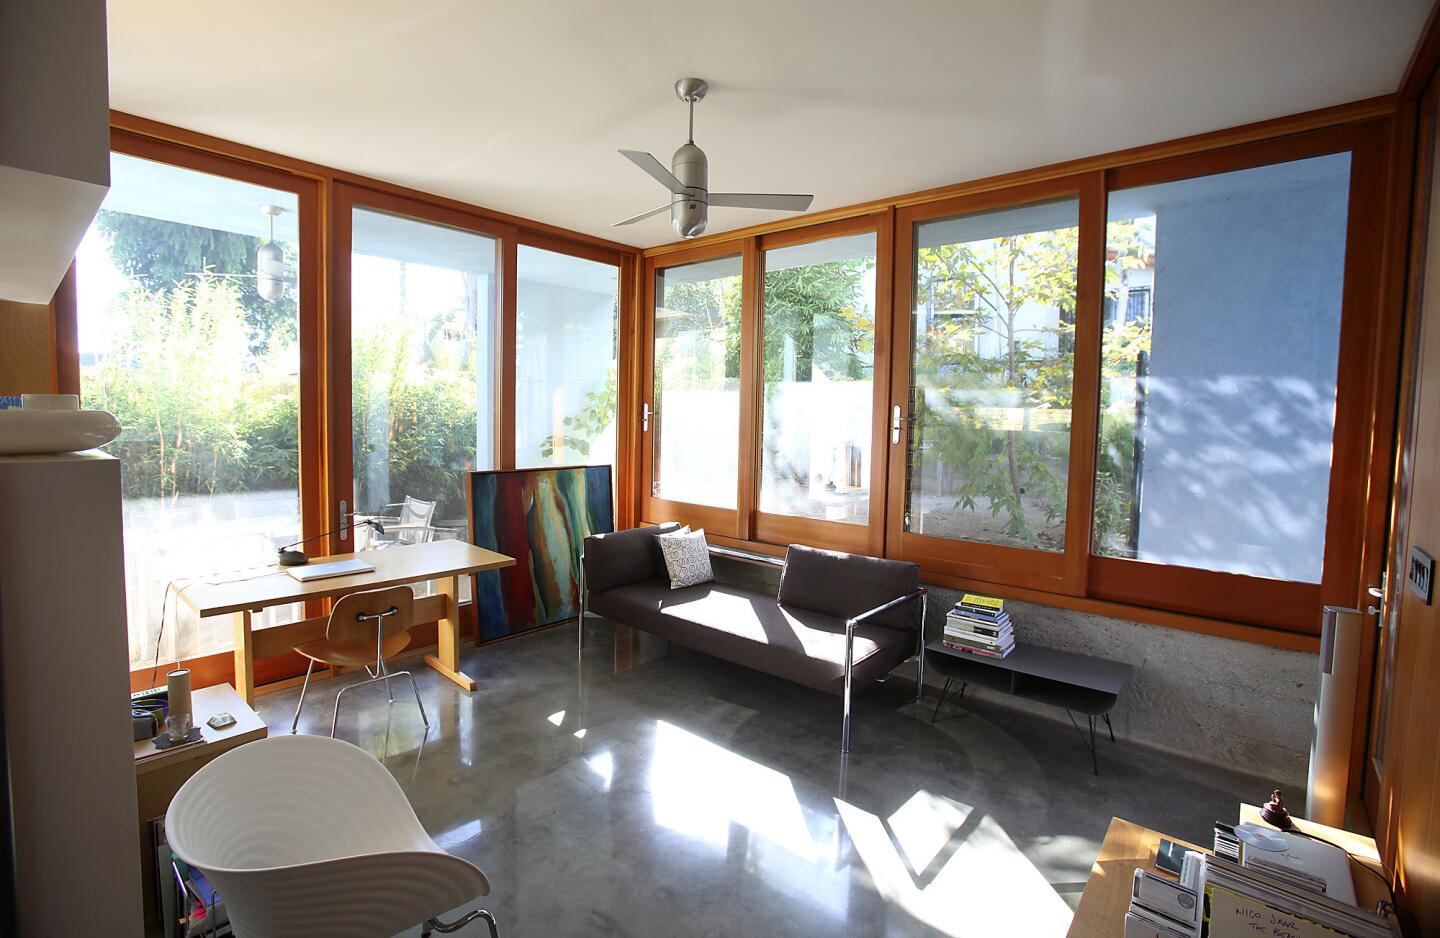 The doors and windows from Taylor Brothers Architectural Products in Los Angeles cost about $25,000, a splurge justified by the welcome sense of openness they provide. "We kept cost in mind to know when to spend and when not to," designer Molina says.